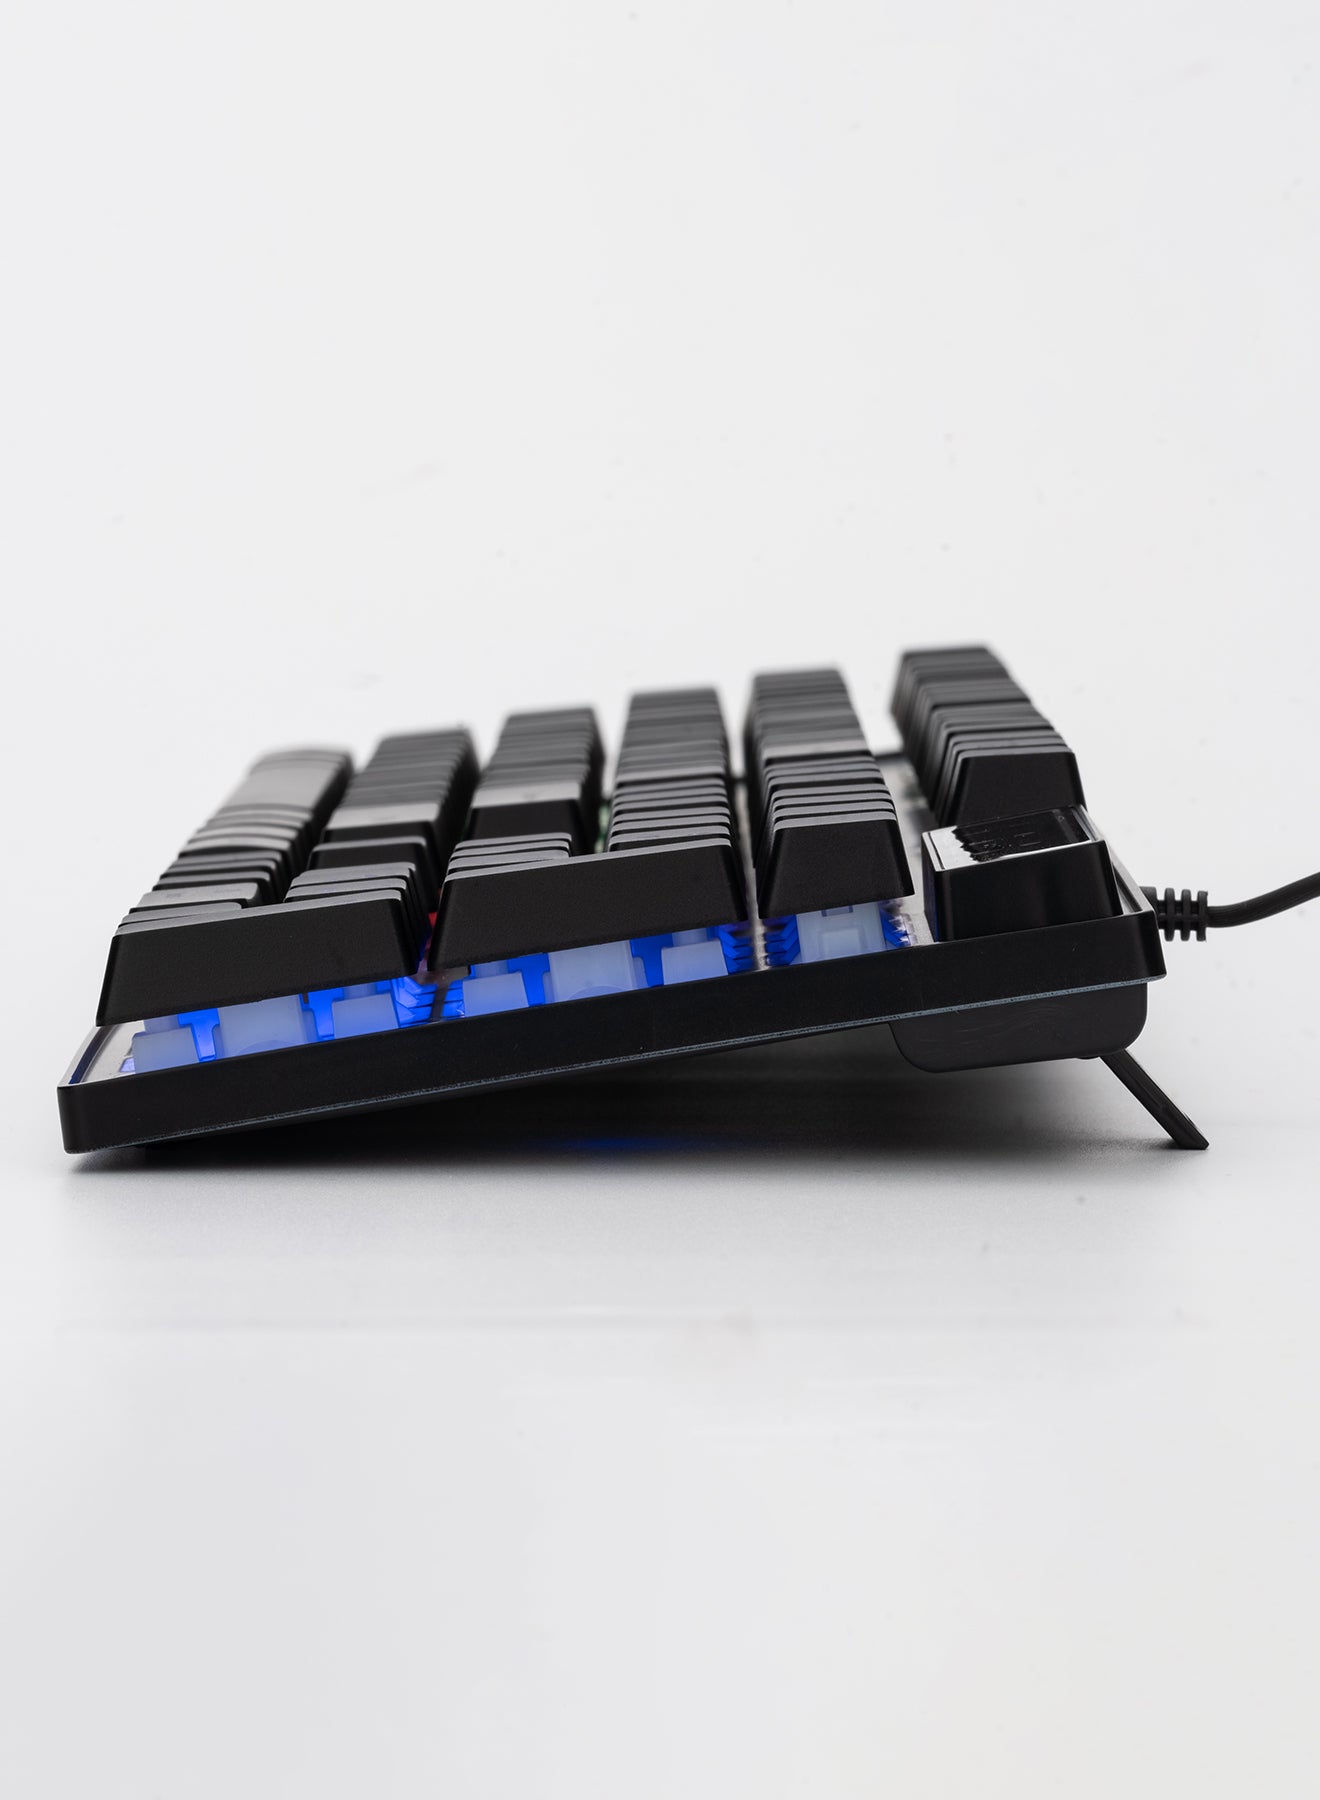 Thunder Wired Mouse And Keyboard Set with RGB lights and Adjustable DPI 